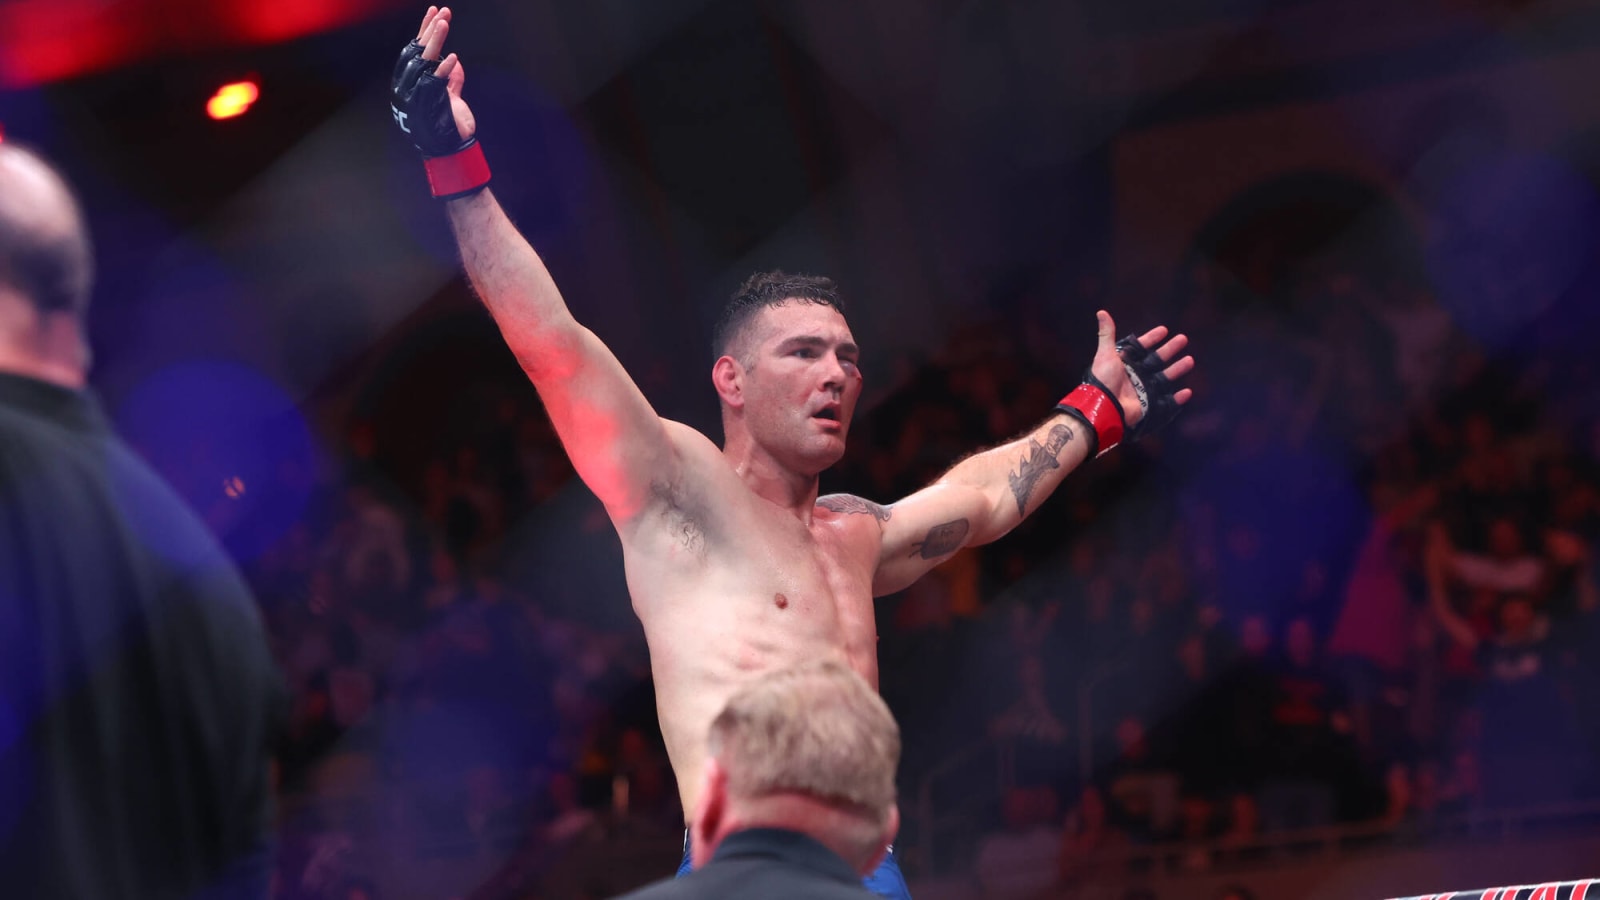 After controversial win at UFC Atlantic City, what’s next for Chris Weidman?